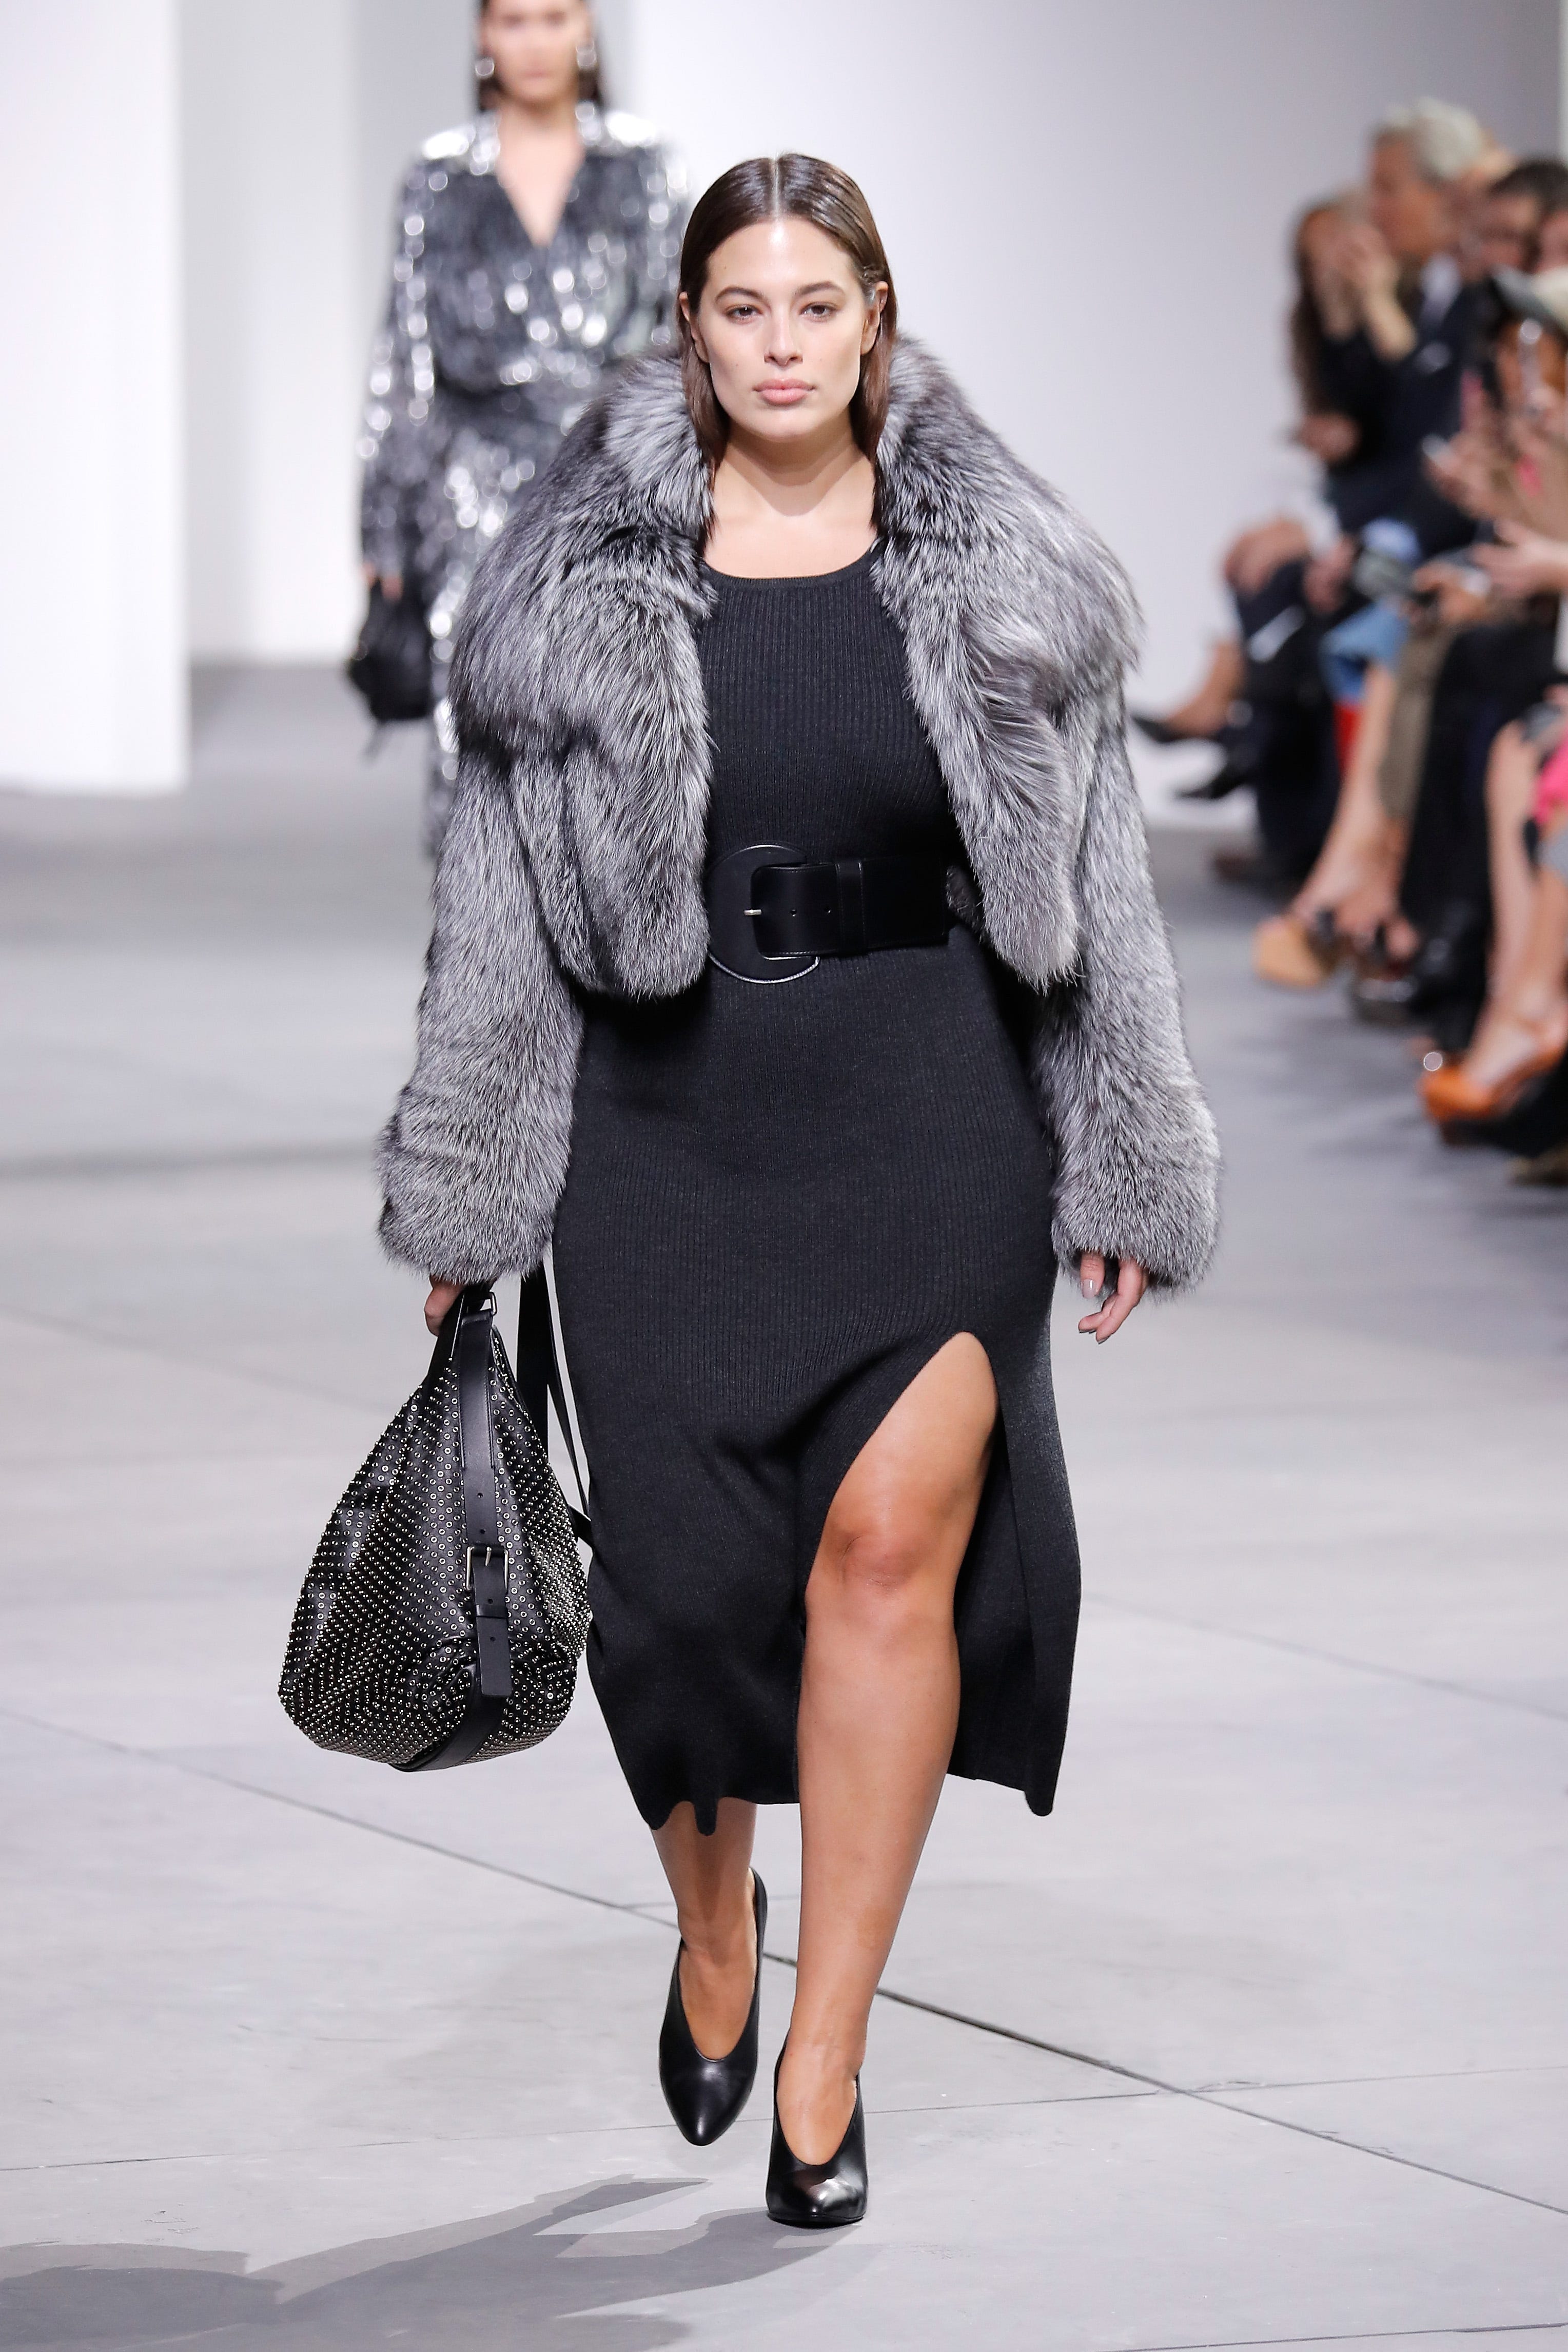 Michael Kors casts Ashley Graham as the first plus-size model to walk on his runway